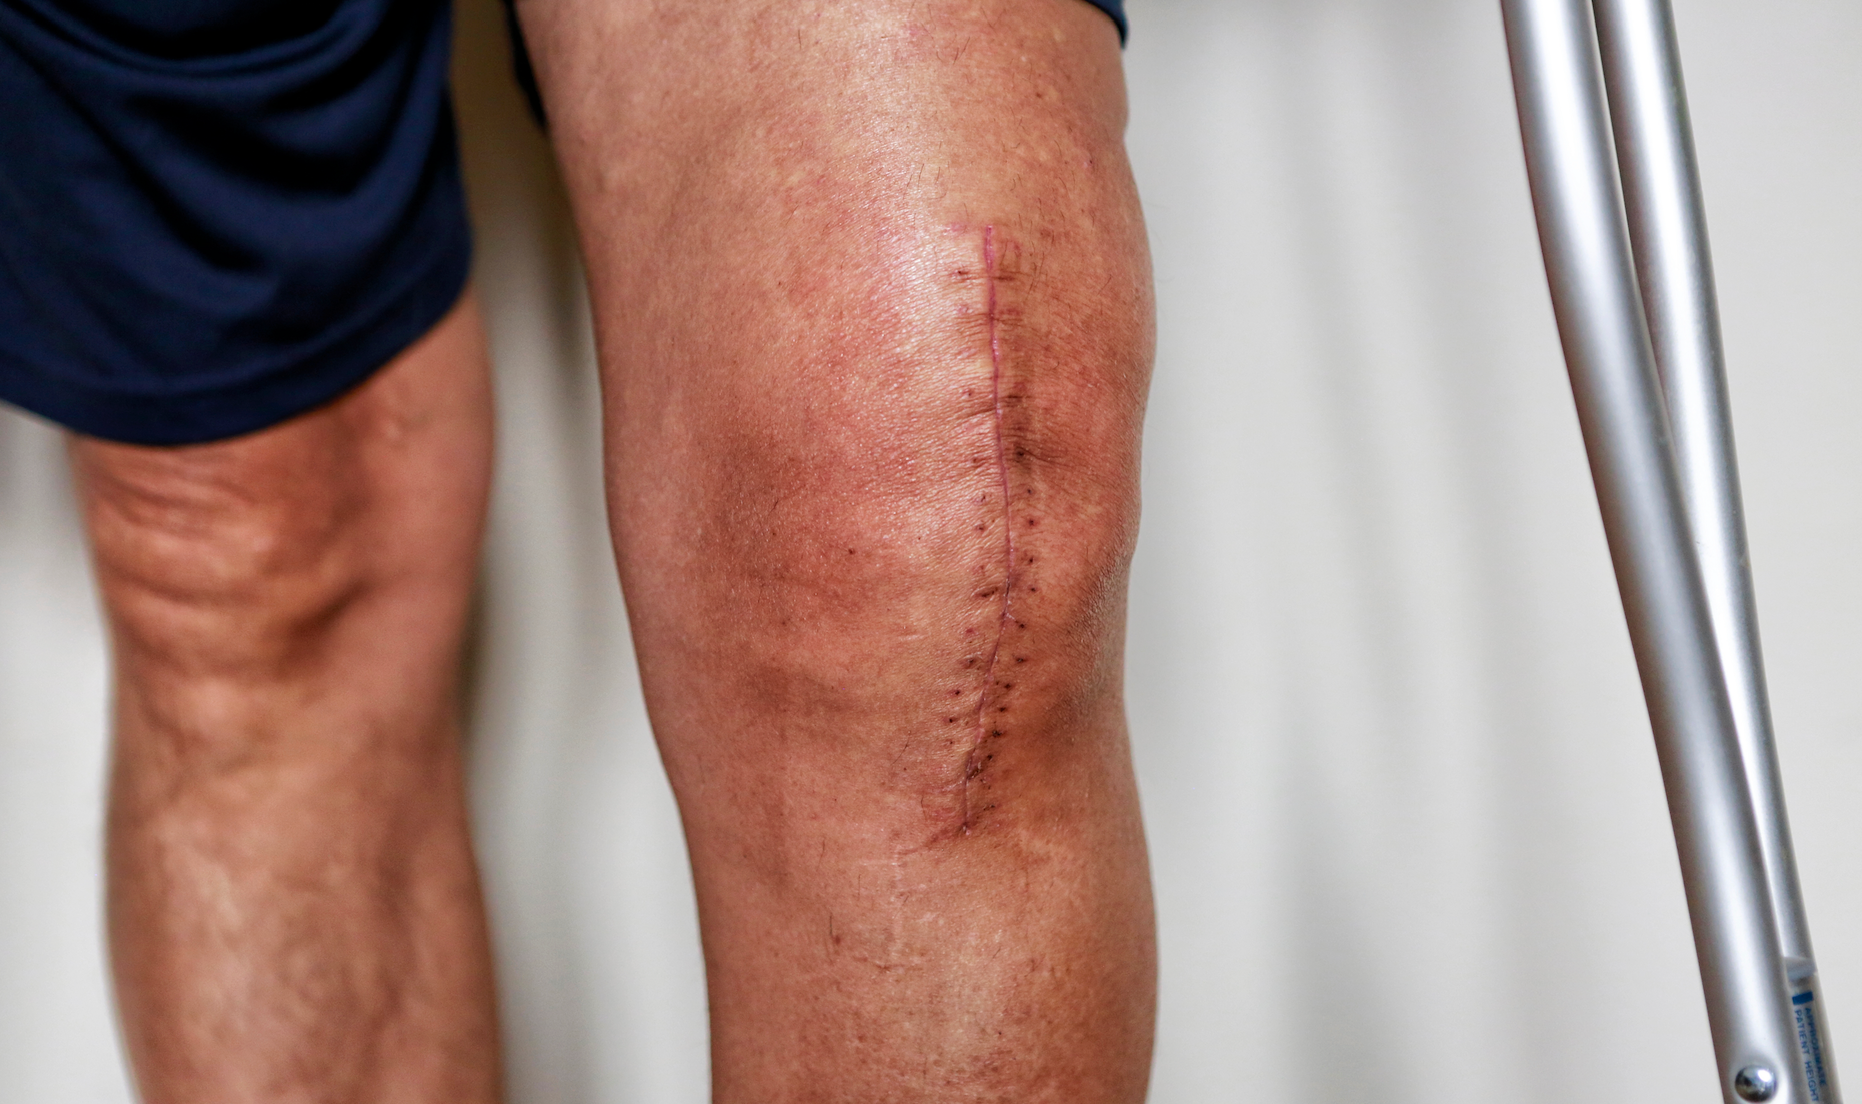 What Are The Most Common Surgical Scars? (And How to Treat Them)